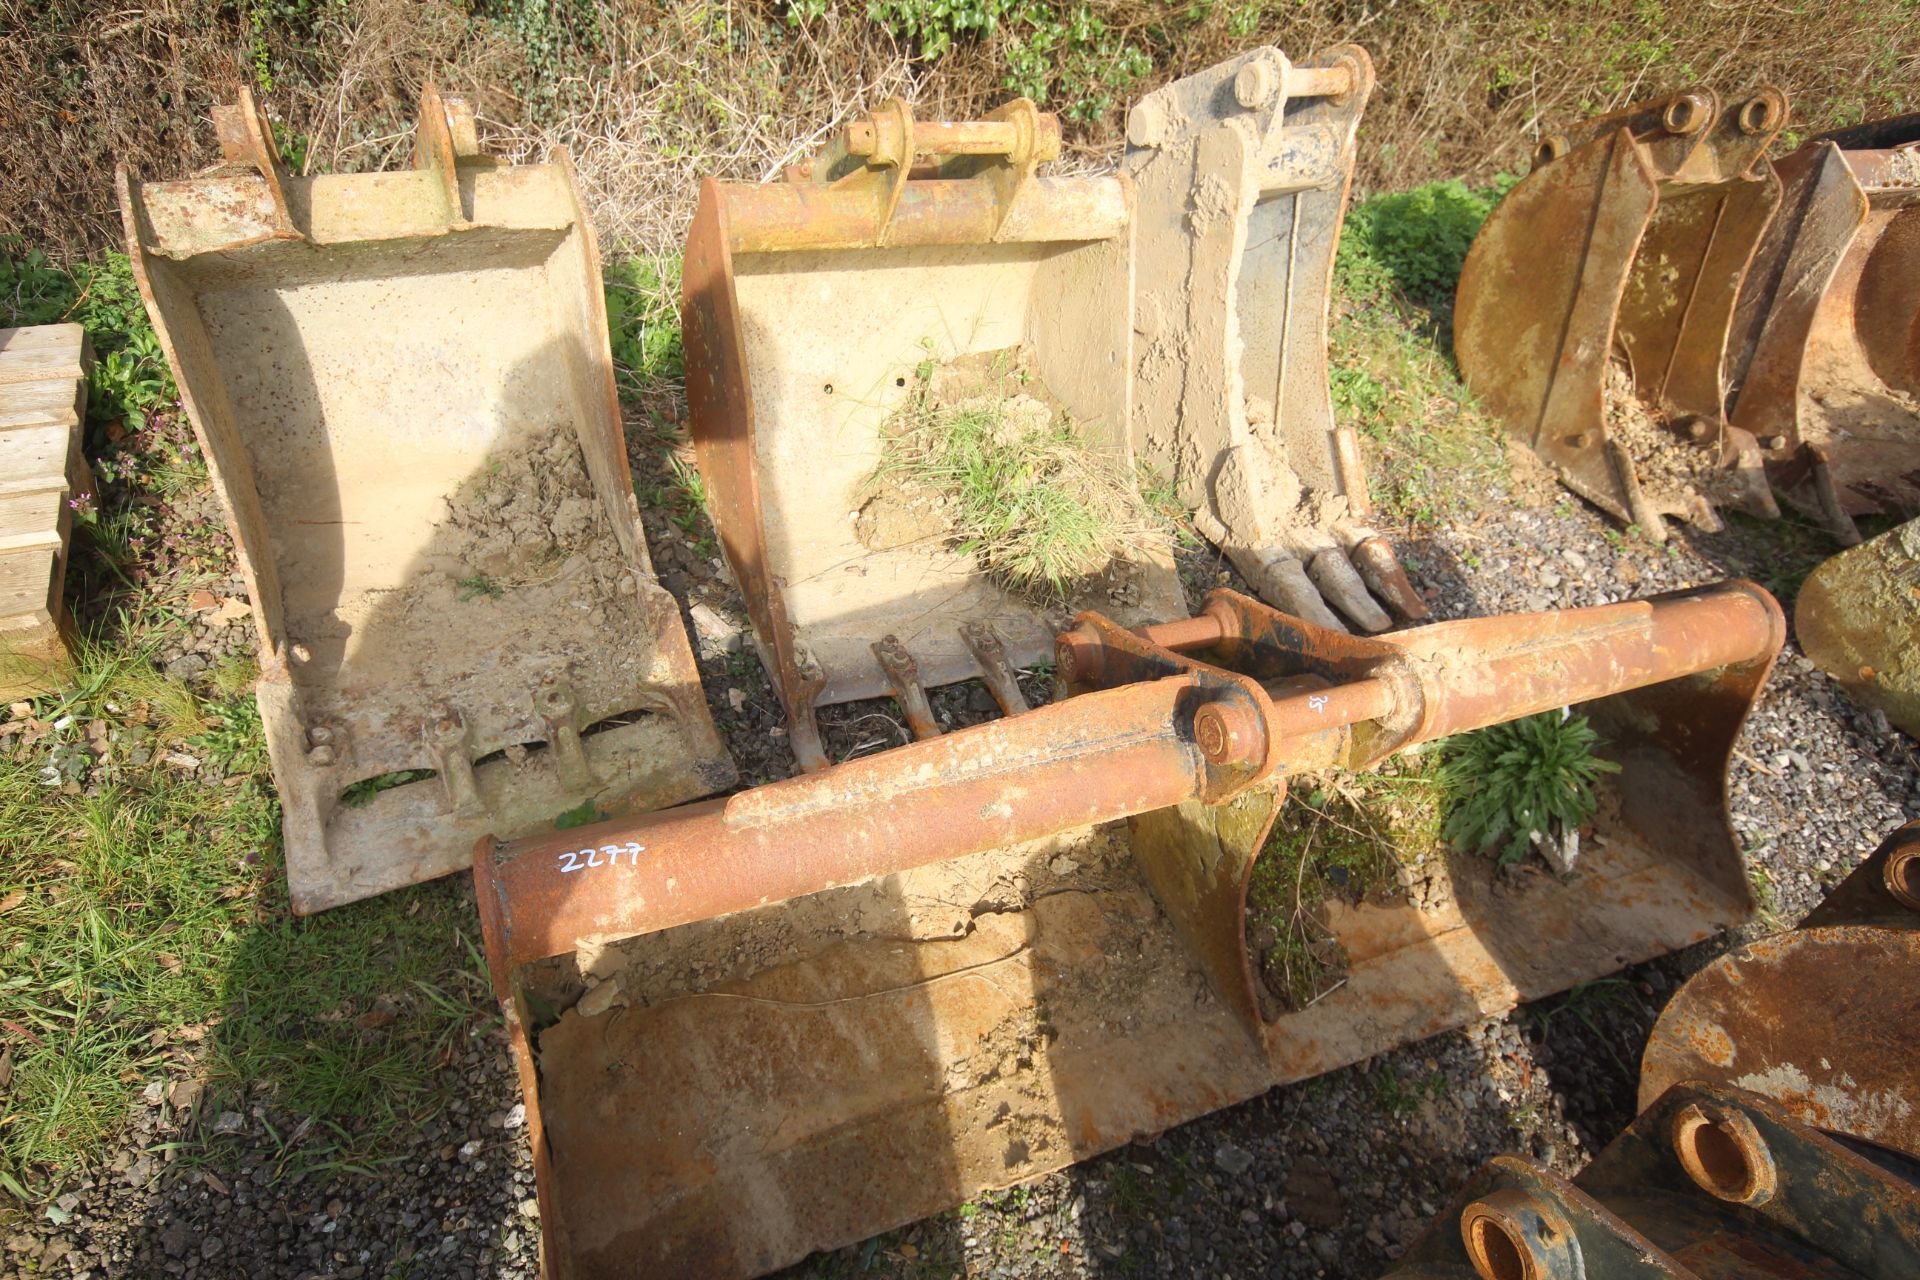 4x excavator buckets. To include 30in, 23in,12in and 6ft grading. For sale on behalf of the